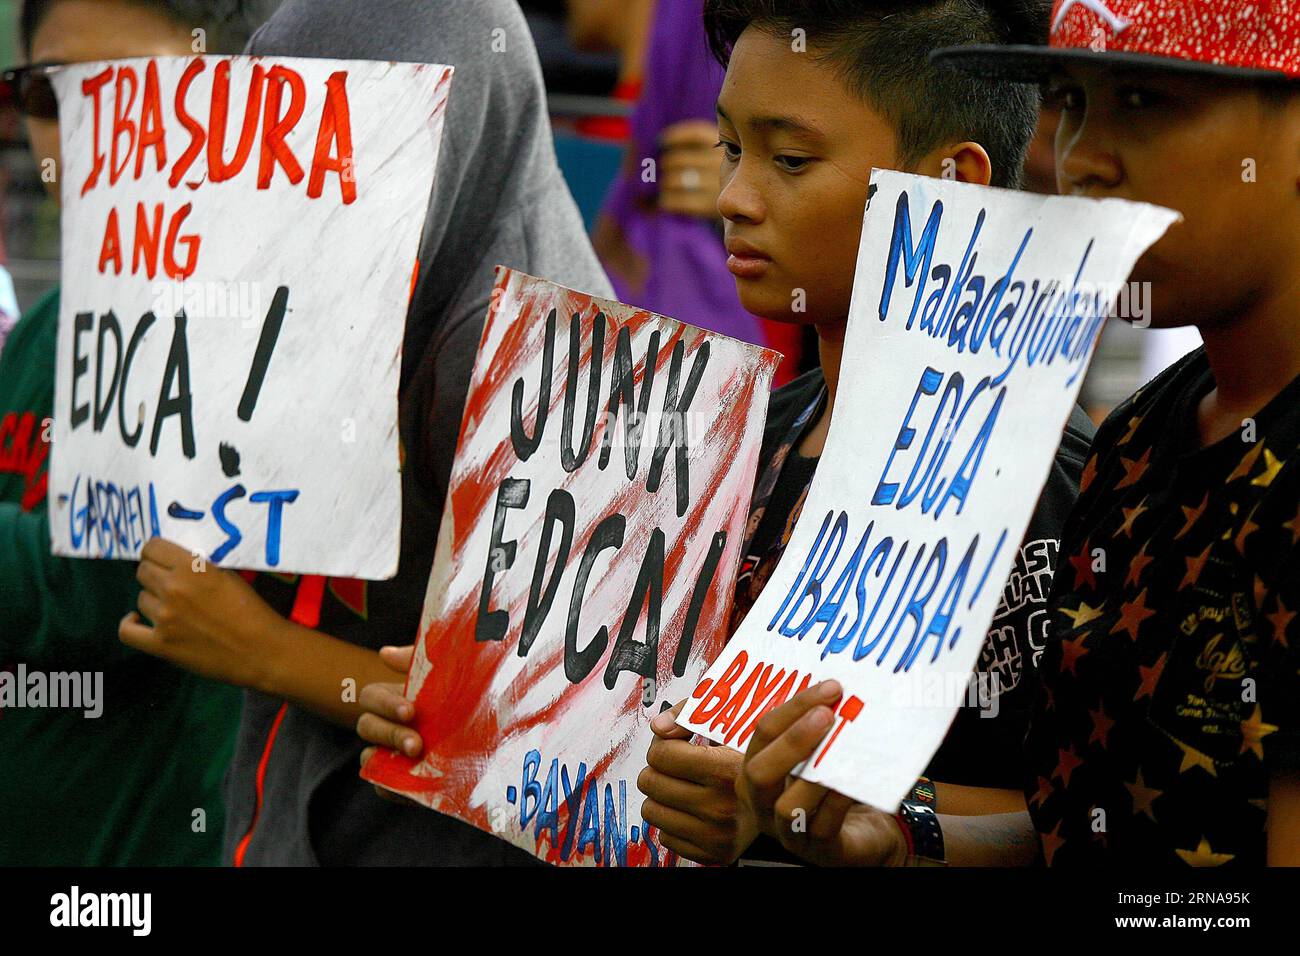 Protest vor US-Botschaft in Manila (160114) -- MANILA, Jan. 14, 2016 -- Activists hold placards during a protest rally in front of the U.S. Embassy in Manila, the Philippines, Jan. 14, 2016. The activists are calling for an end to the Enhanced Defense Cooperation Agreement (EDCA) after the Philippine Supreme Court decided that the Philippines defense cooperation deal with the United States is constitutional and does not need the concurrence of the Senate. ) (zjy) PHILIPPINES-MANILA-ANTI-EDCA-PROTEST RouellexUmali PUBLICATIONxNOTxINxCHN   Protest before U.S. Embassy in Manila 160114 Manila Jan Stock Photo